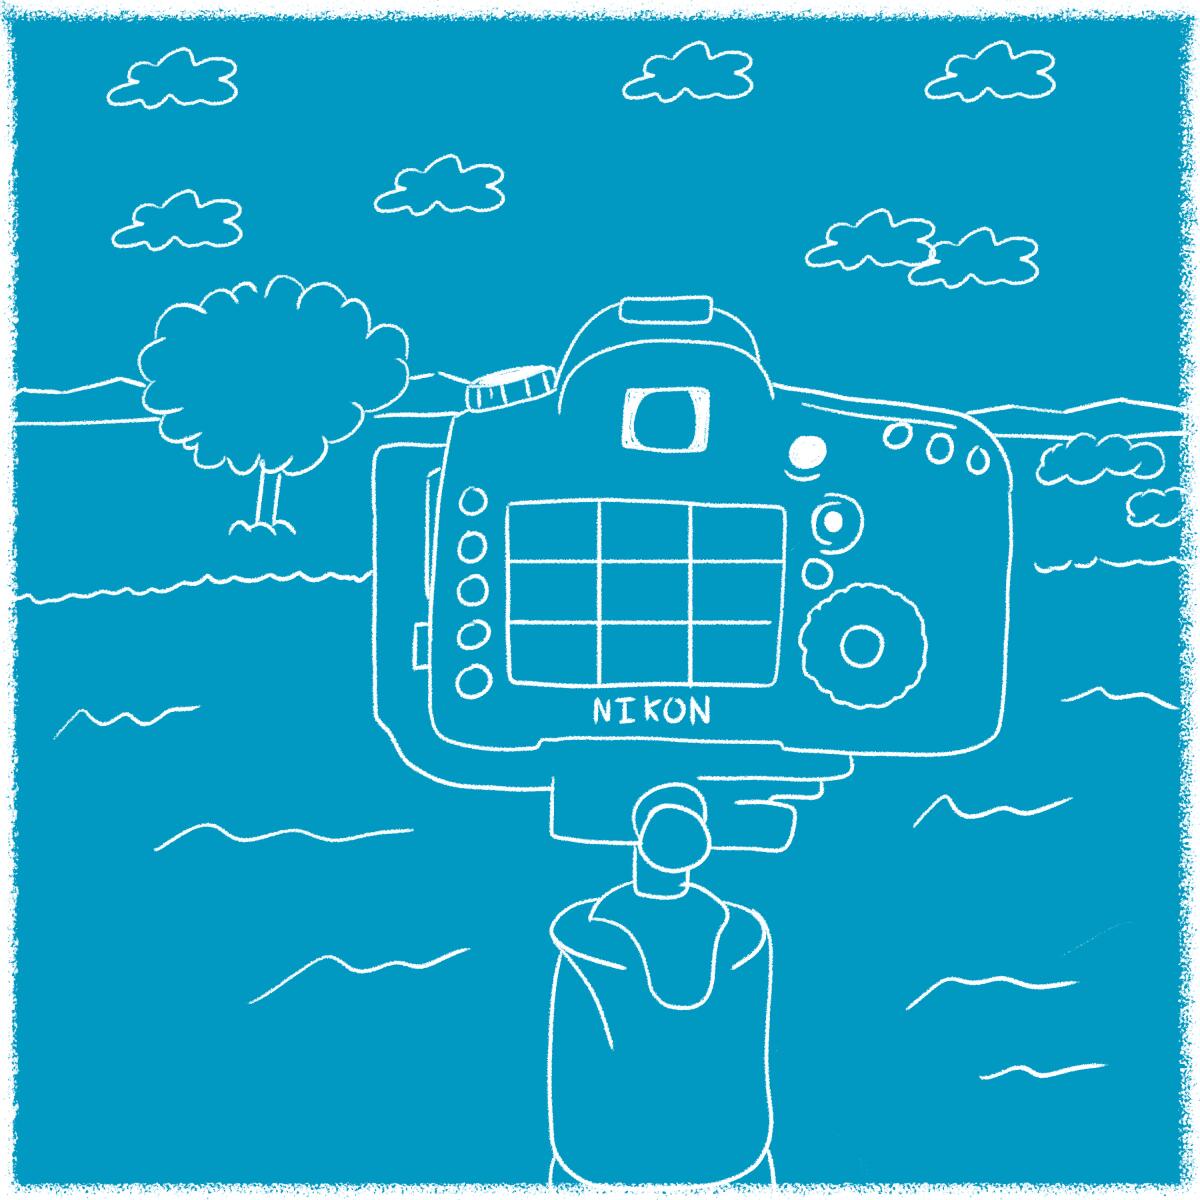 Illustration shows a closeup of a Nikon camera with a landscape of trees and clouds.